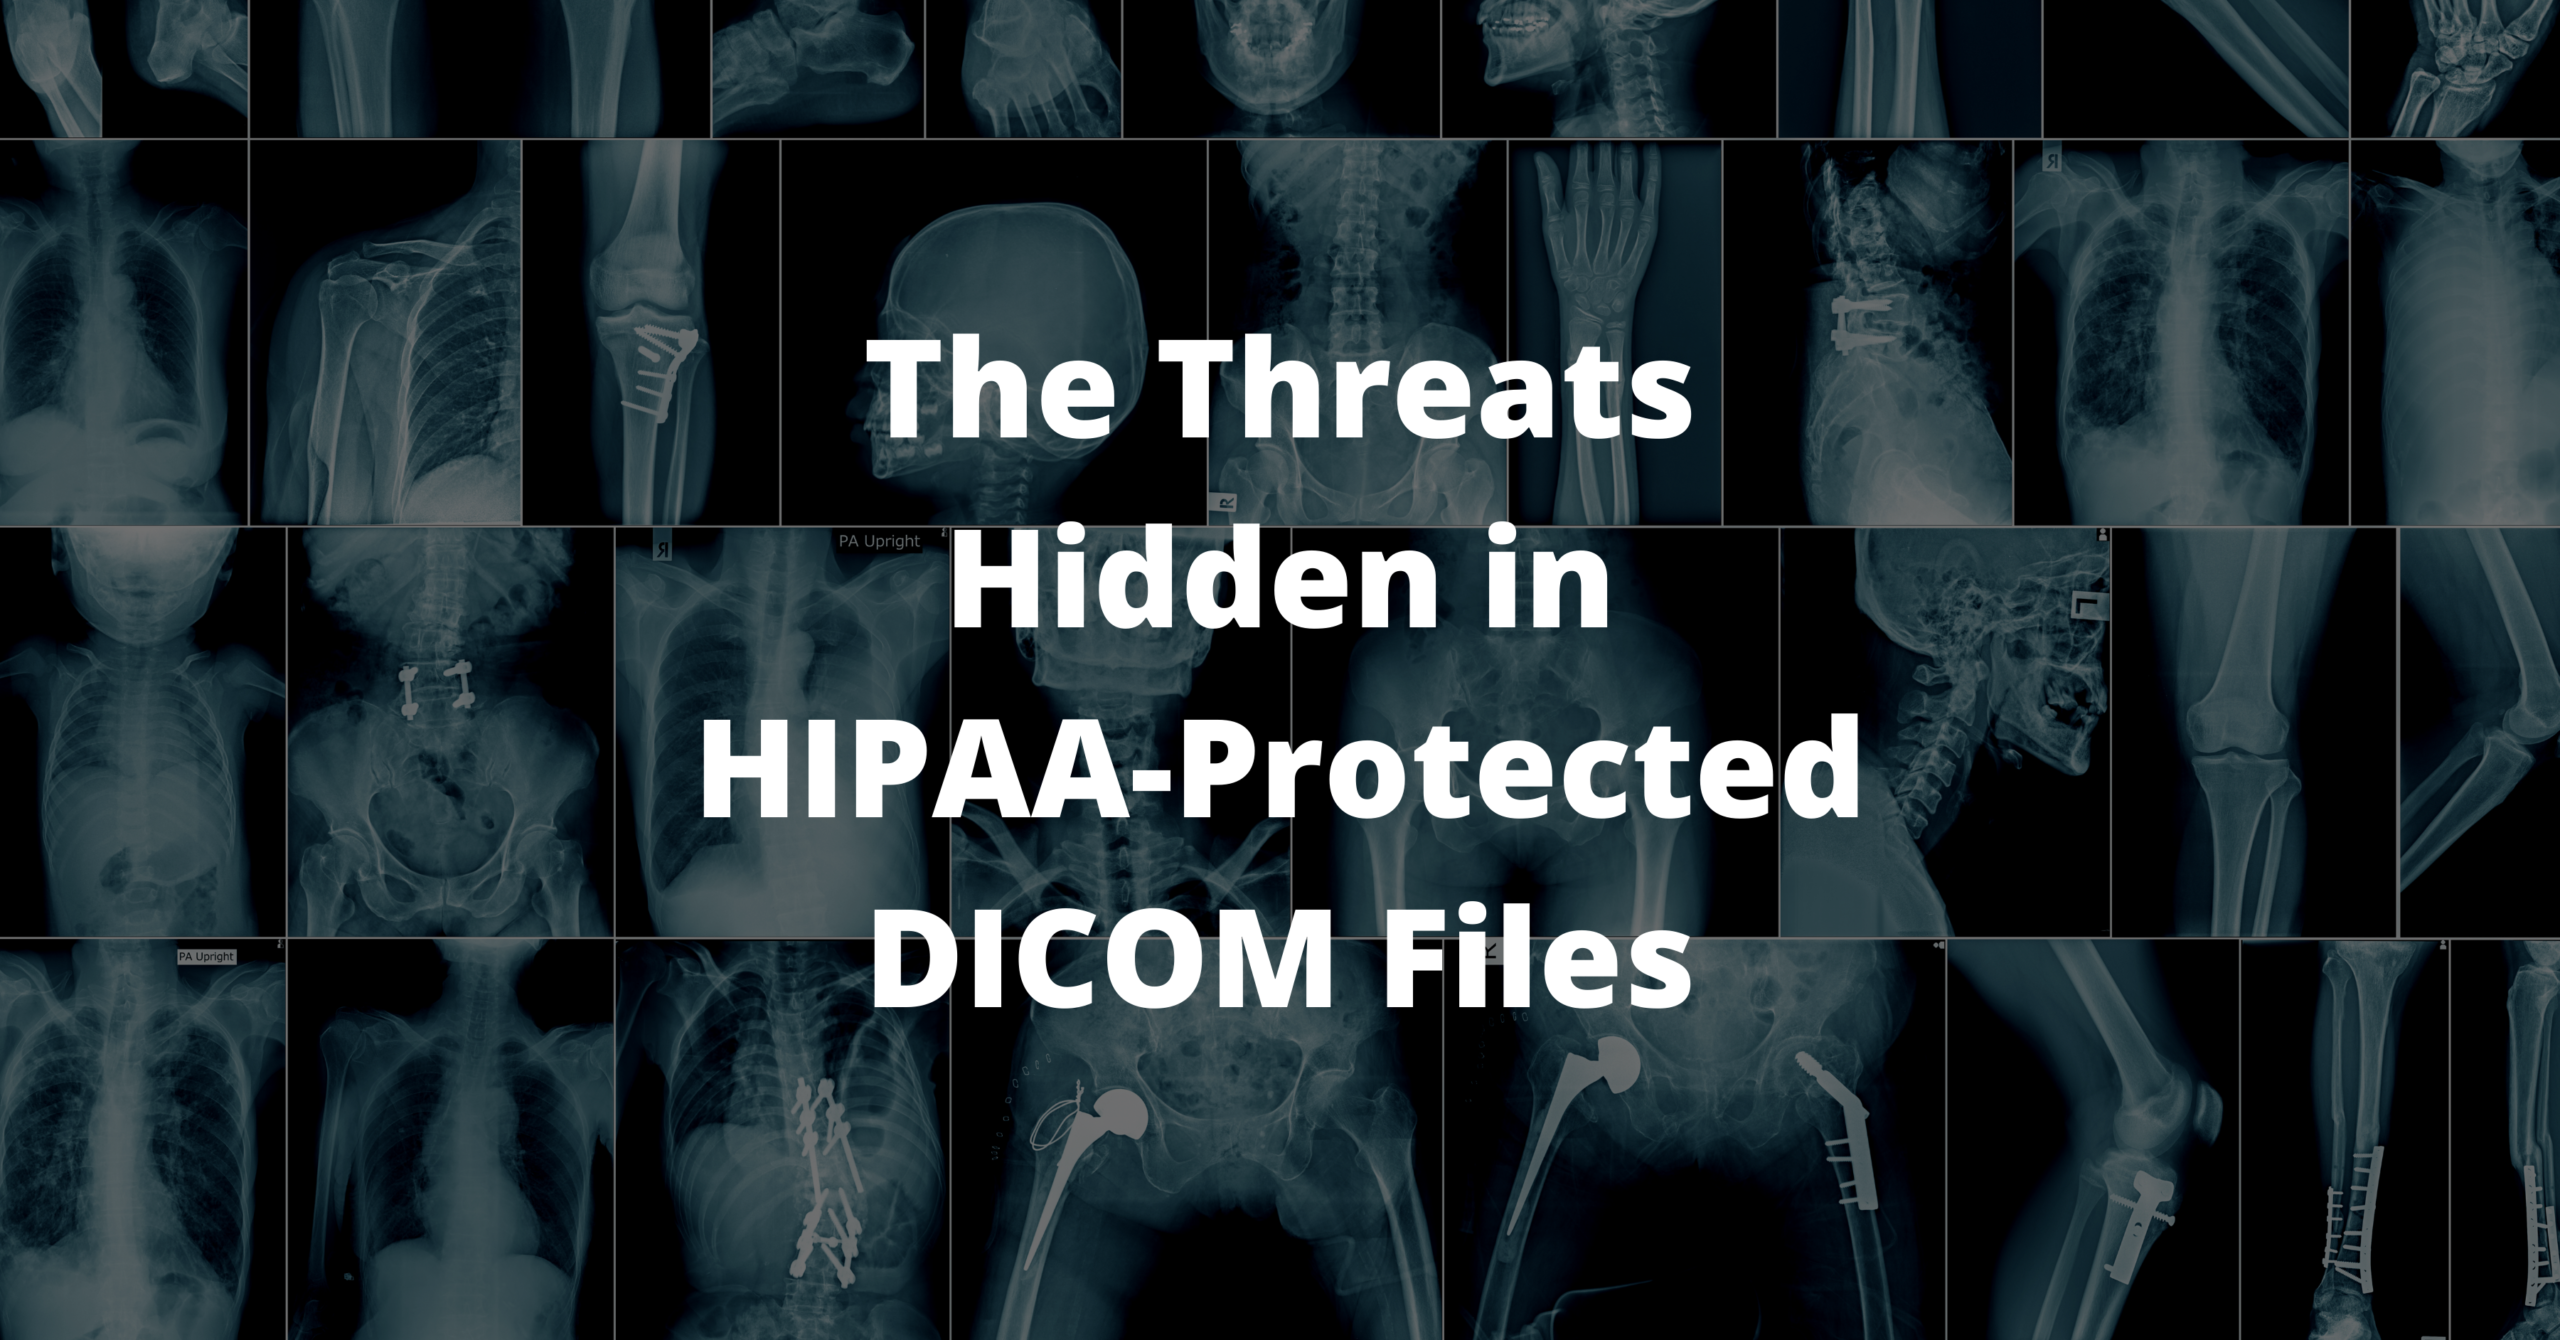 Image of multiple x-rays with text overlayed promoting a Votiro article about hidden threats in HIPAA-Protected DICOM files - Votiro